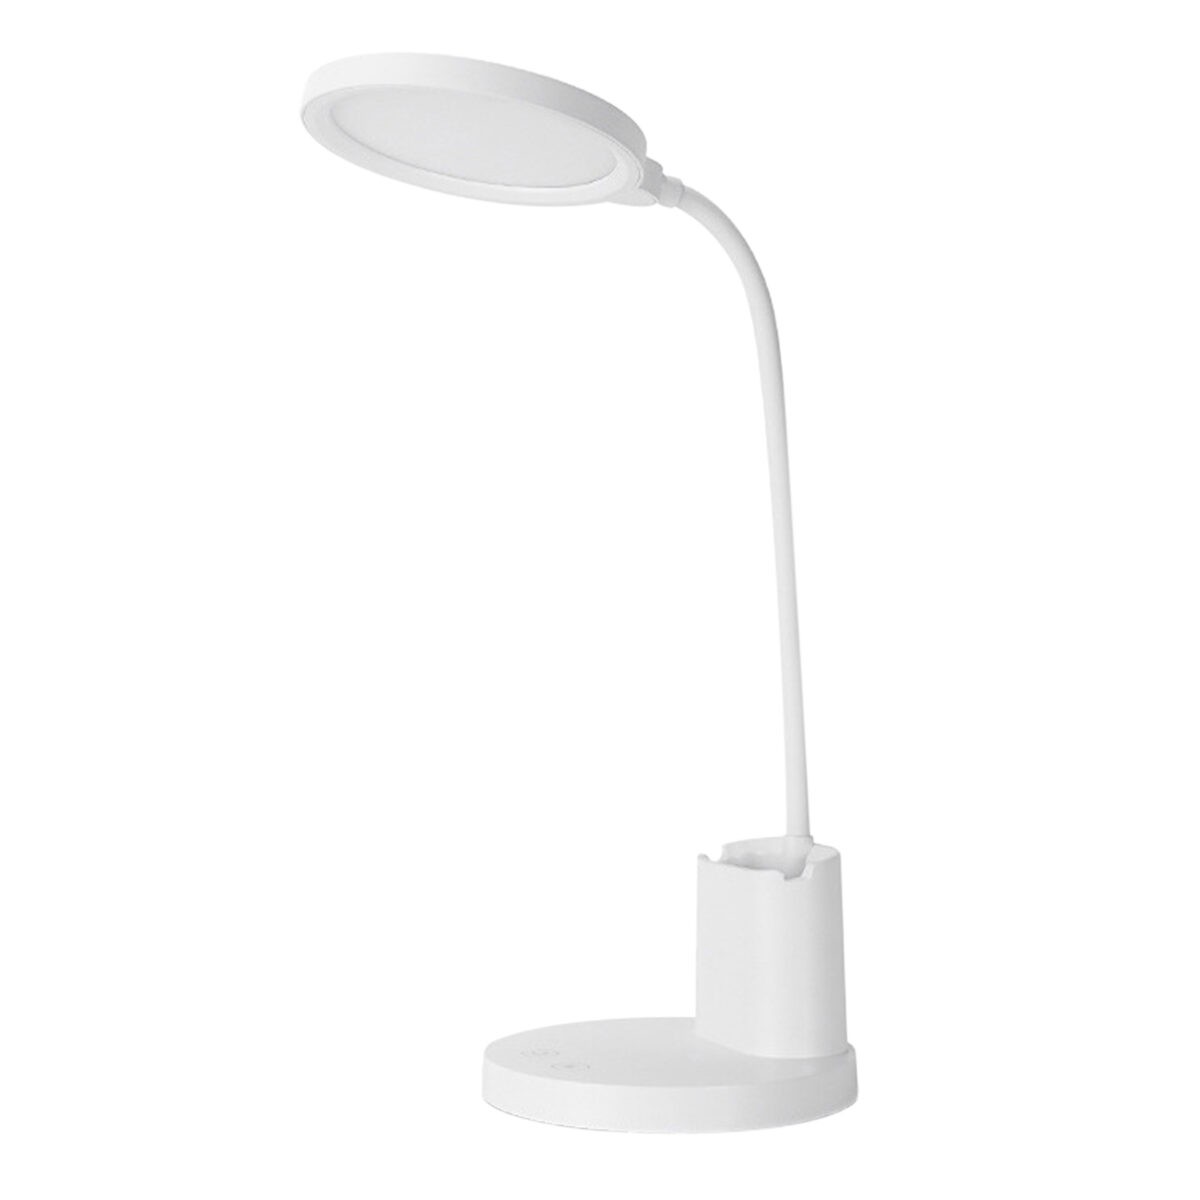 Led Desk Lamp REMAX ReSee Series Smart Eye-Caring 1500mAh RT-E815 With Container